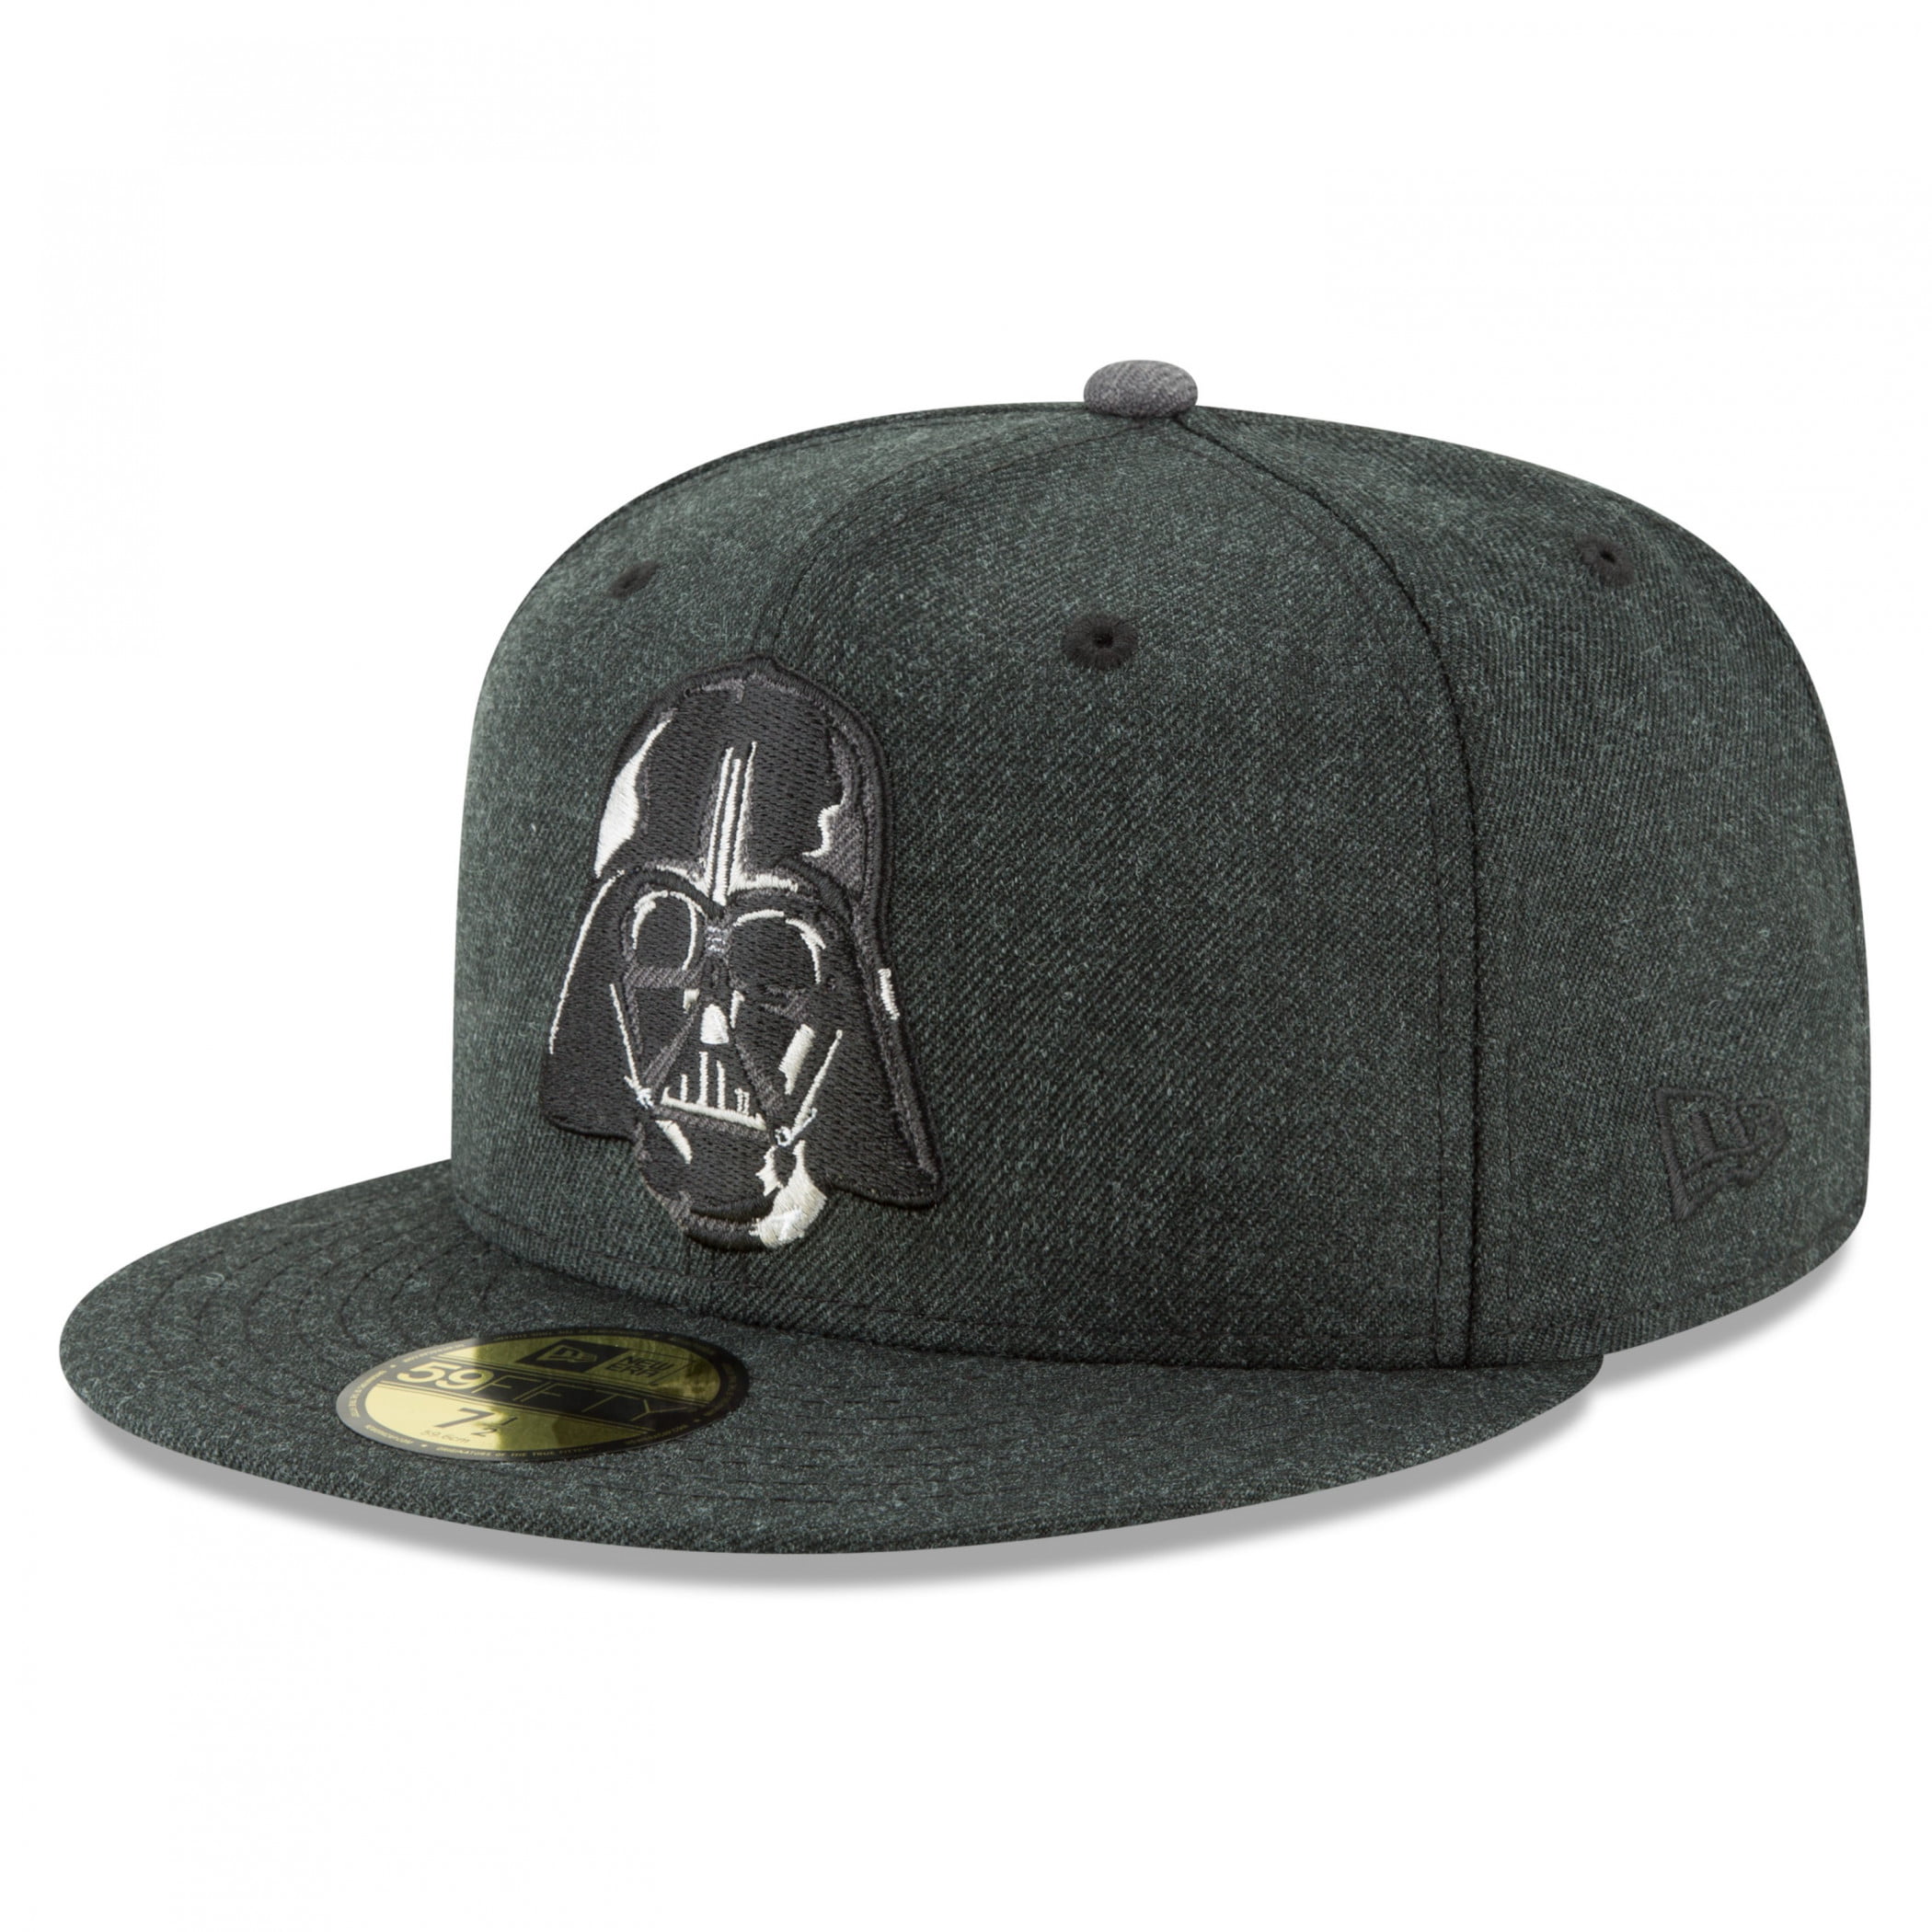 Star Wars Darth Vader Helmet New Era 59Fifty Fitted Hat-7 3/8 Fitted